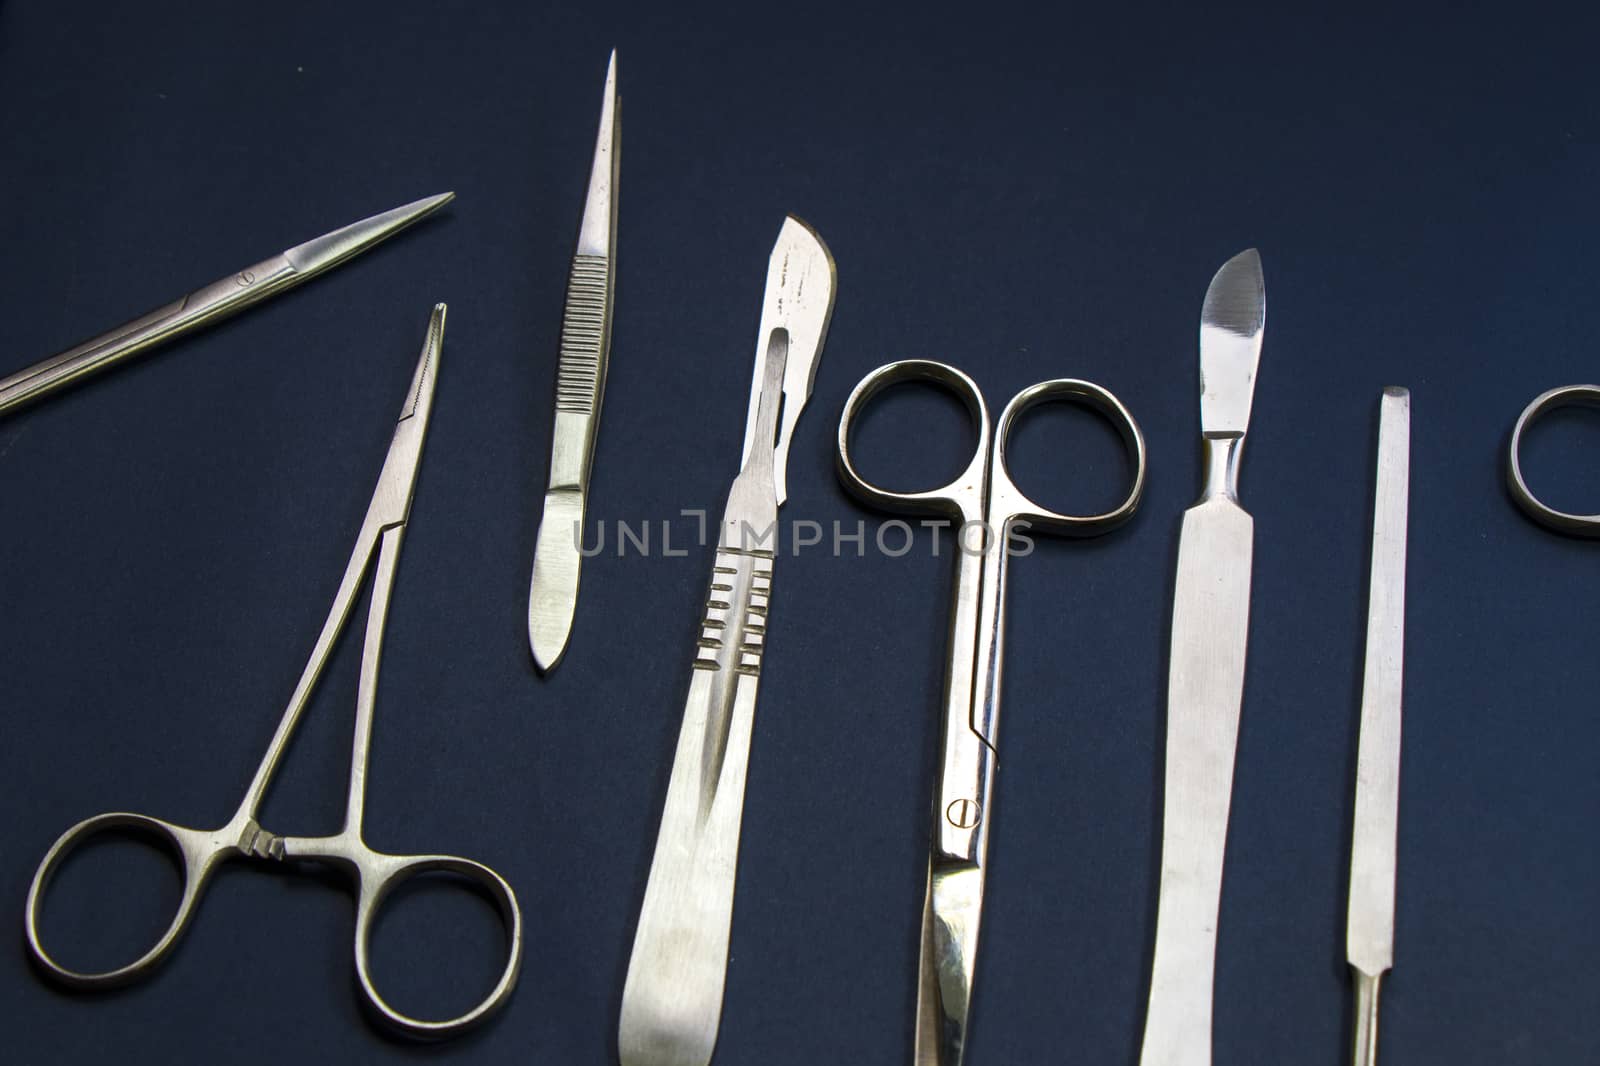 Dissection Kit - Premium Quality Stainless Steel Tools for Medical Students of Anatomy, Biology, Veterinary, Marine Biology with Scalpel Blades